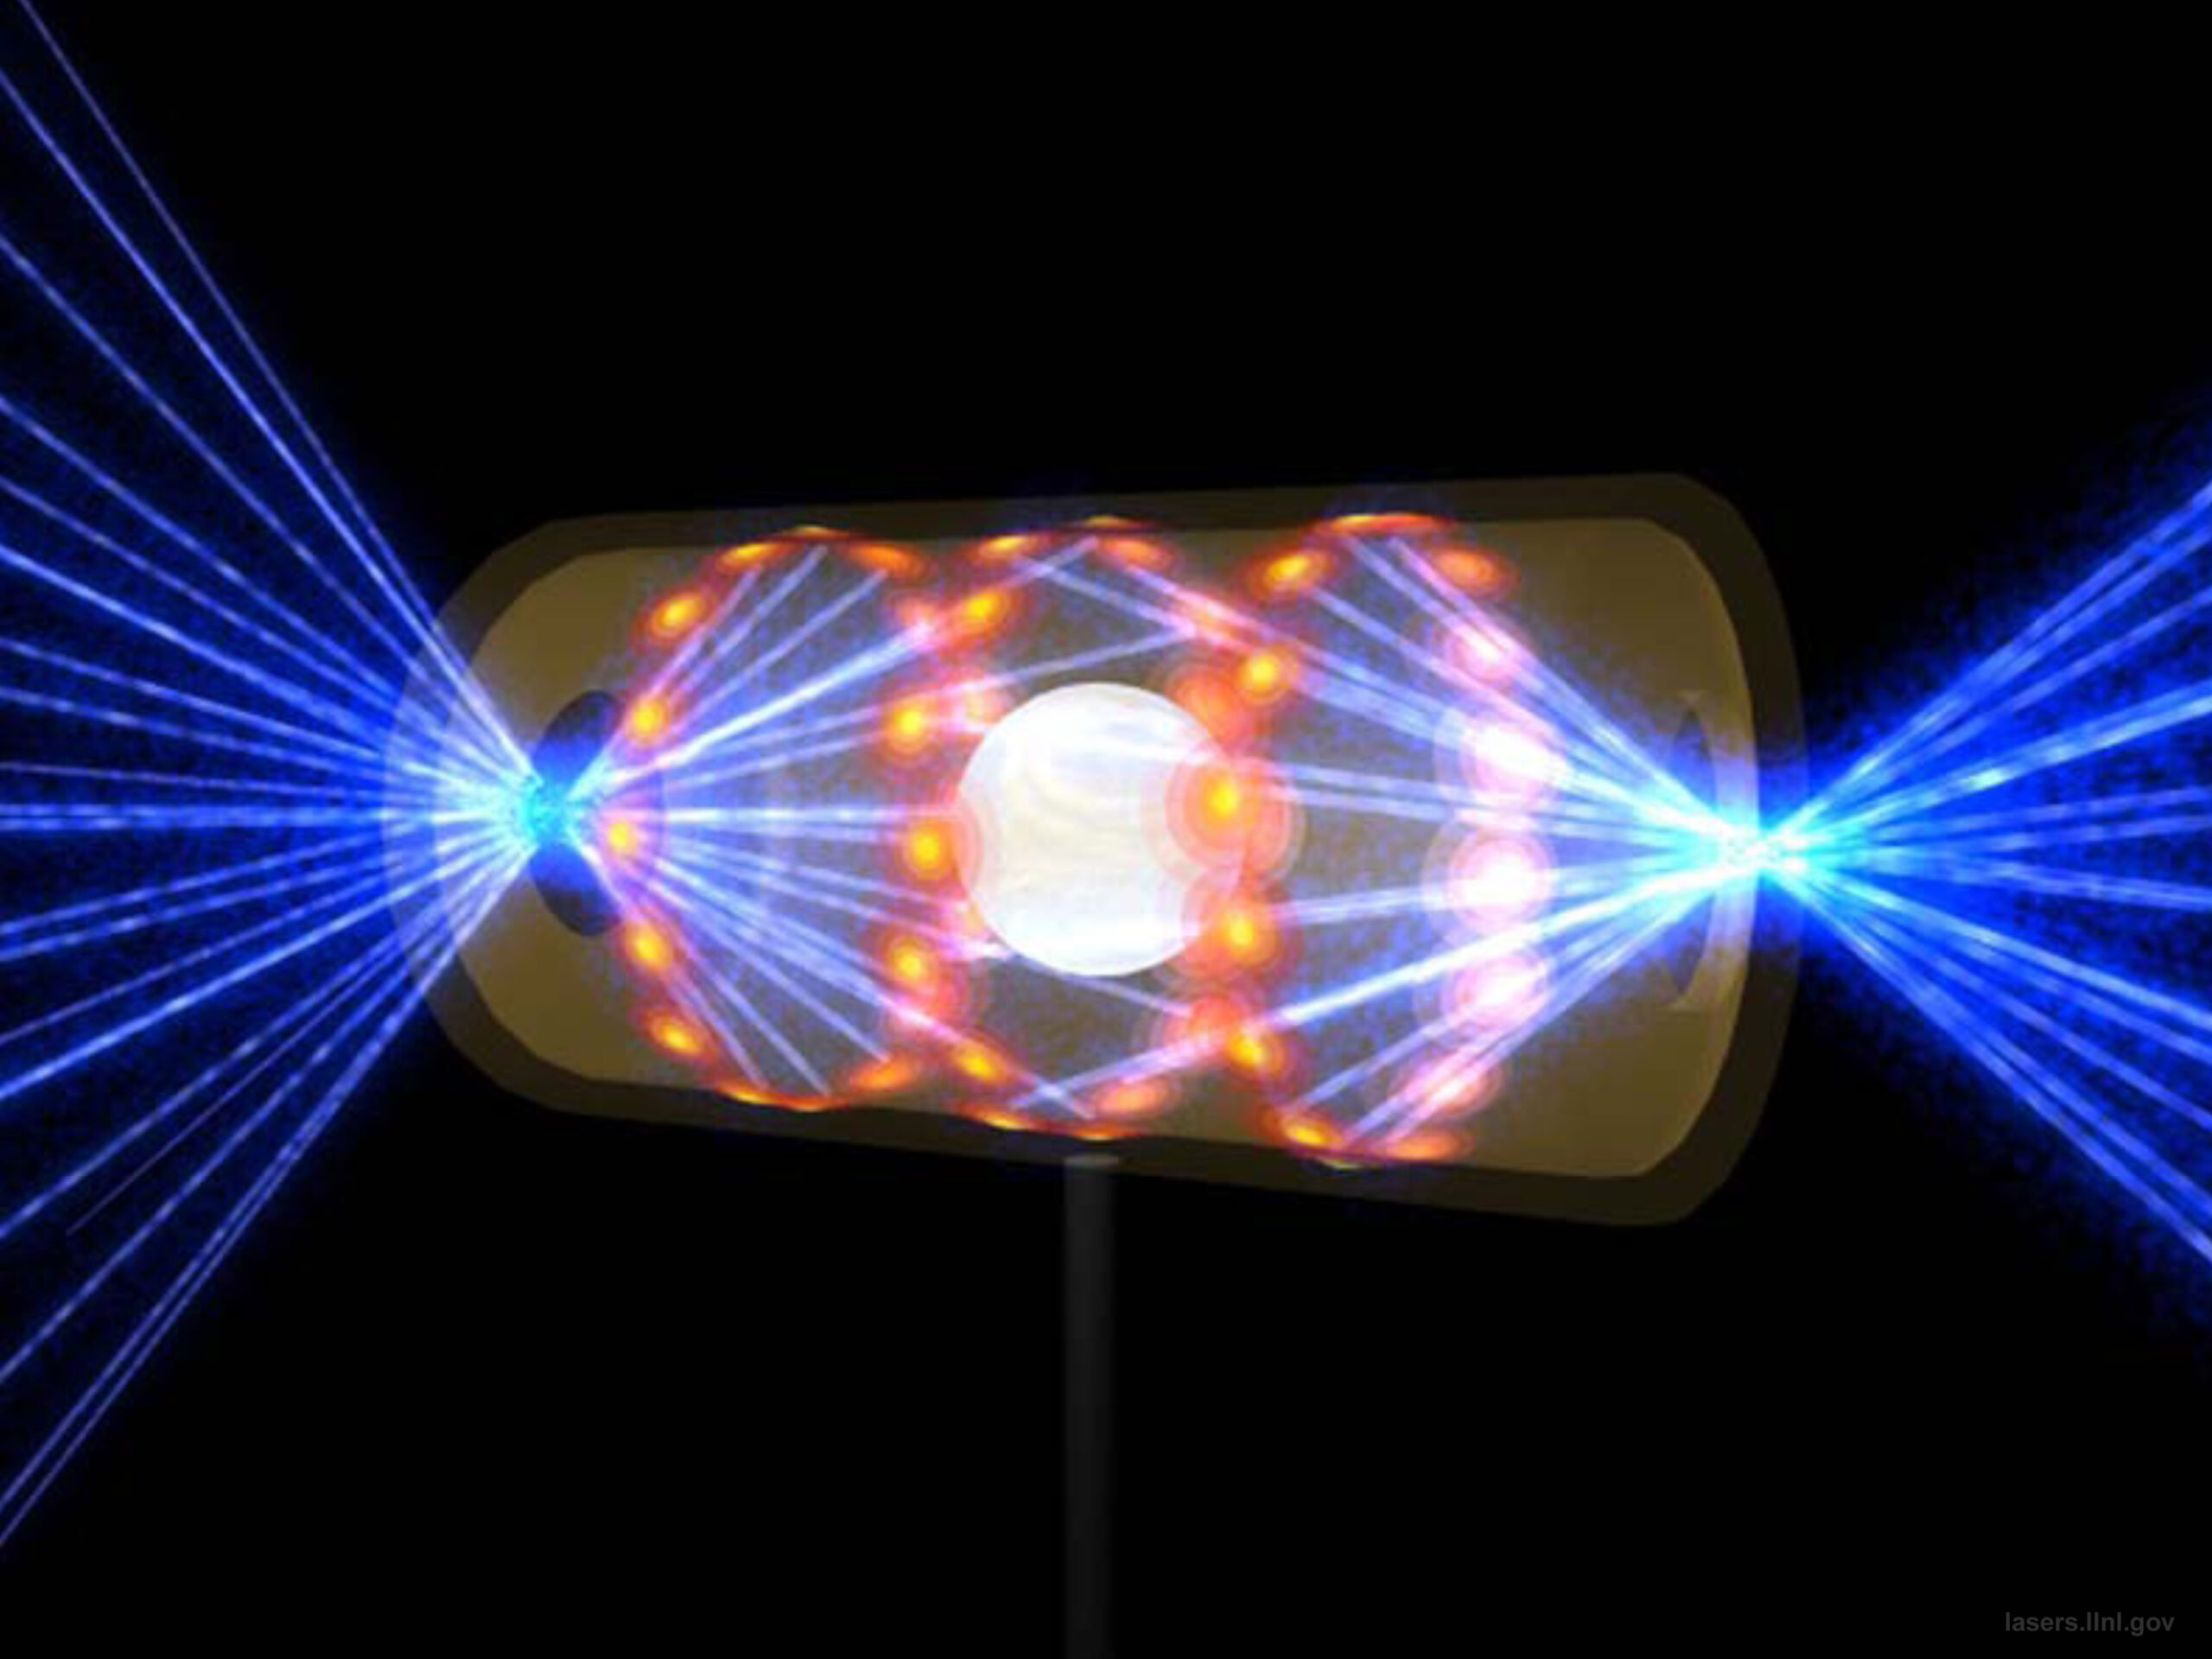 This illustration provided by the National Ignition Facility at the Lawrence Livermore National Laboratory depicts a target pellet inside a hohlraum capsule with laser beams entering through openings on either end. The beams compress and heat the target to the necessary conditions for nuclear fusion to occur. (Lawrence Livermore National Laboratory via AP)